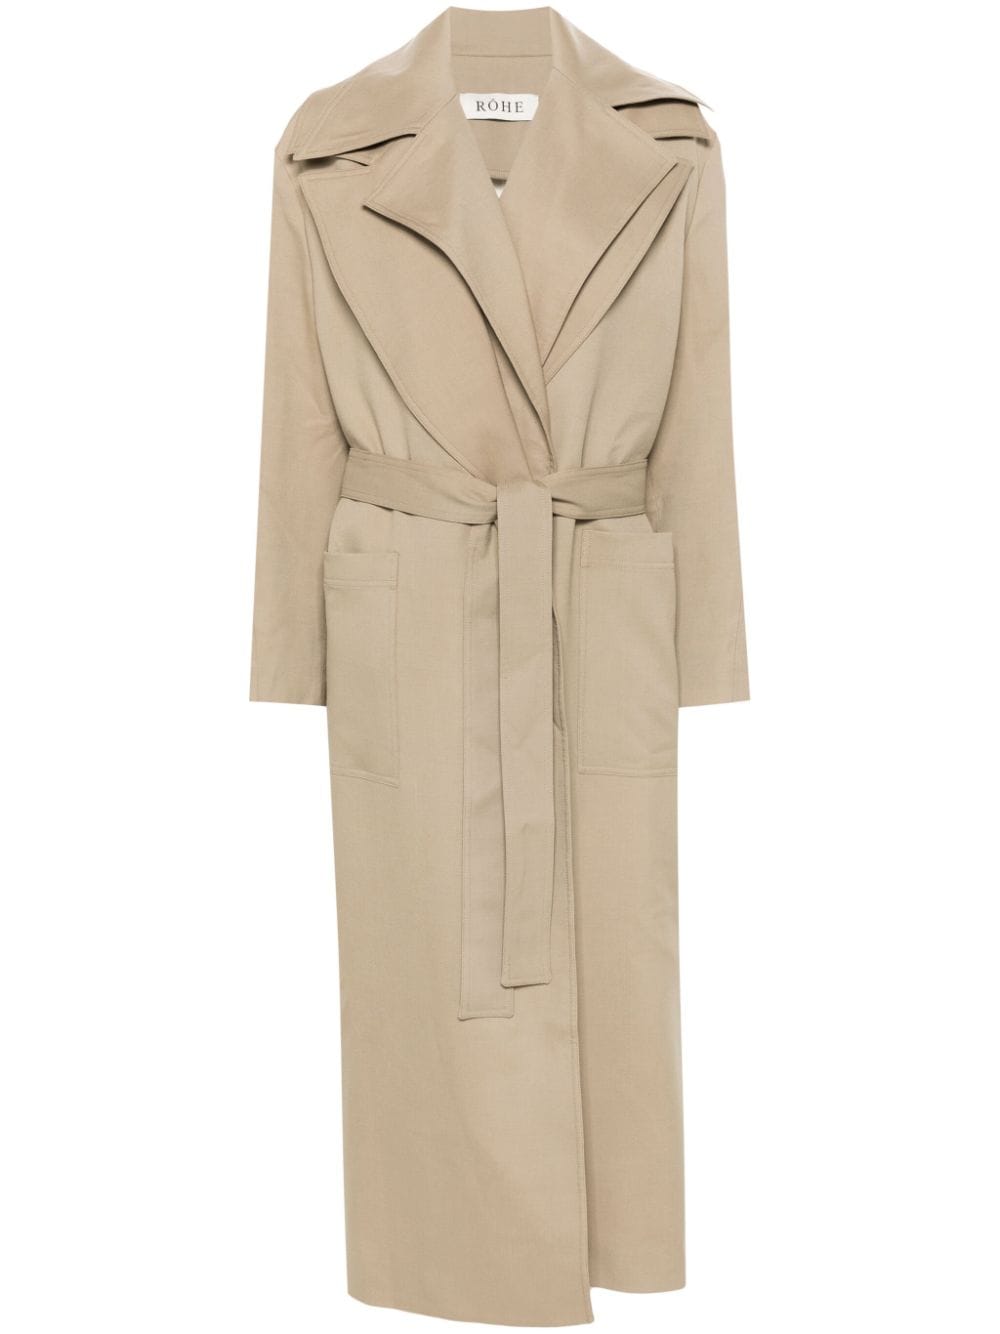 Róhe double-collar belted trench coat